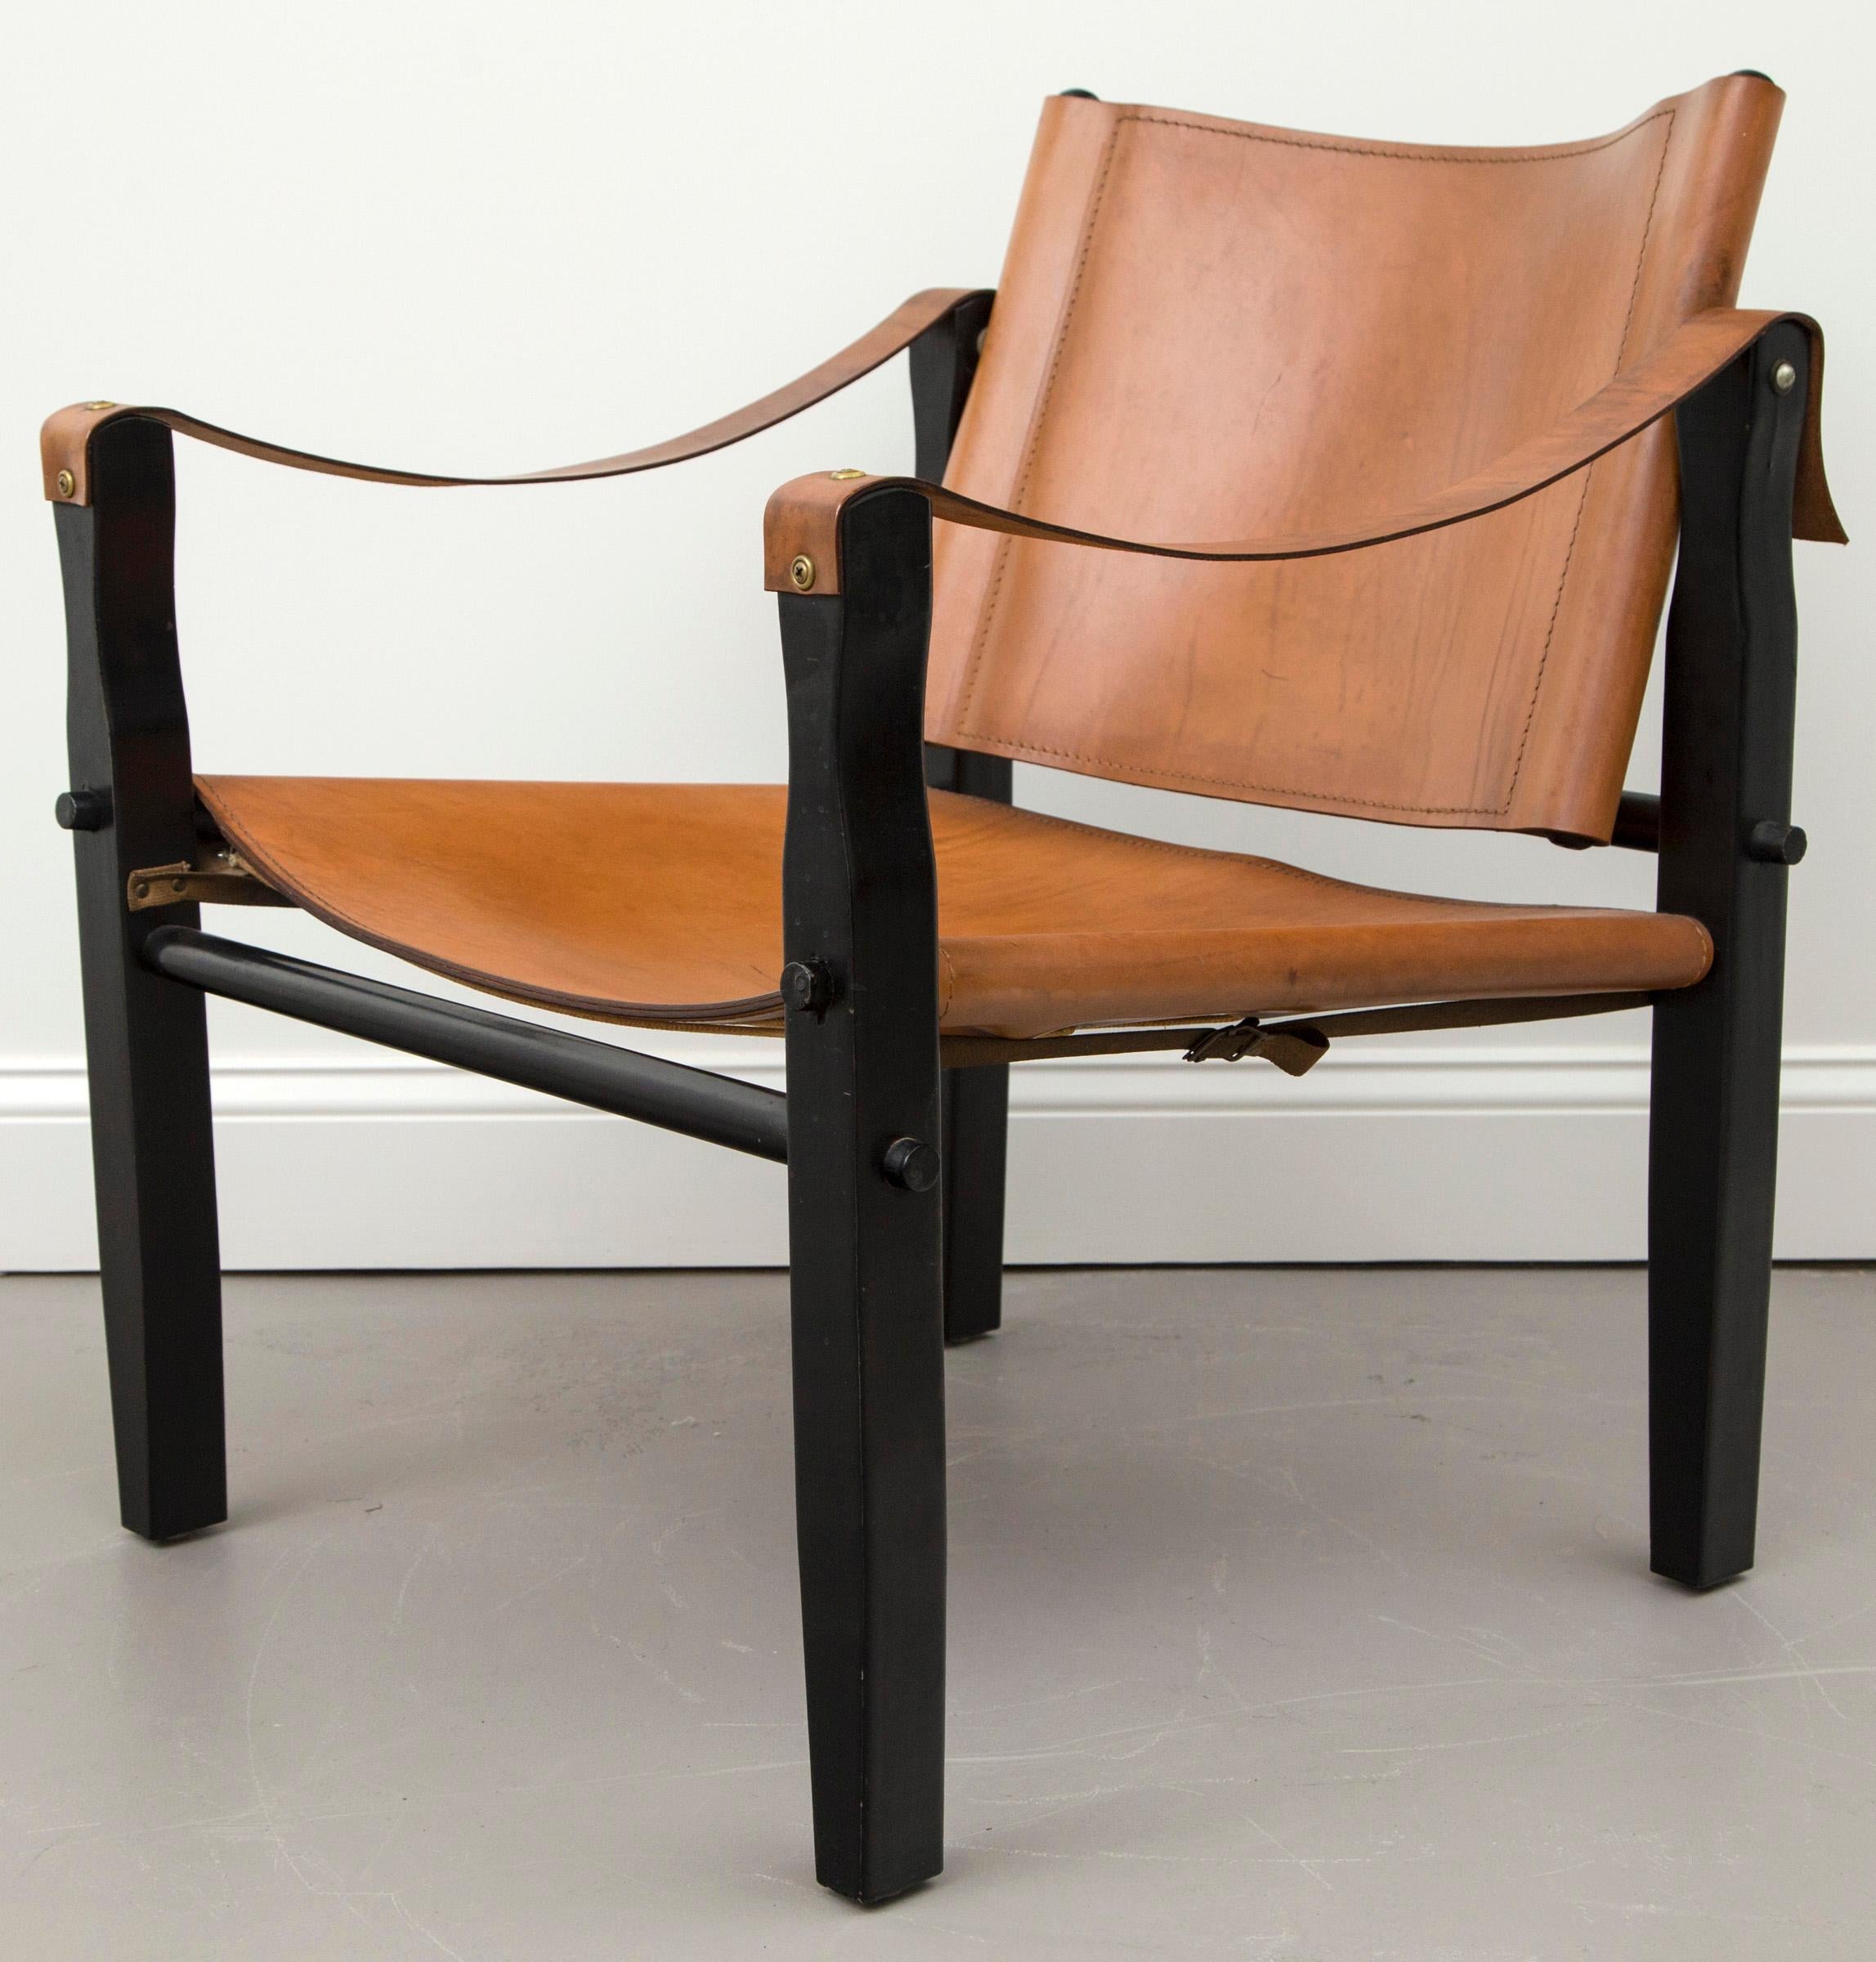 North American Brown Leather Safari Chair by Folding Furniture Co.